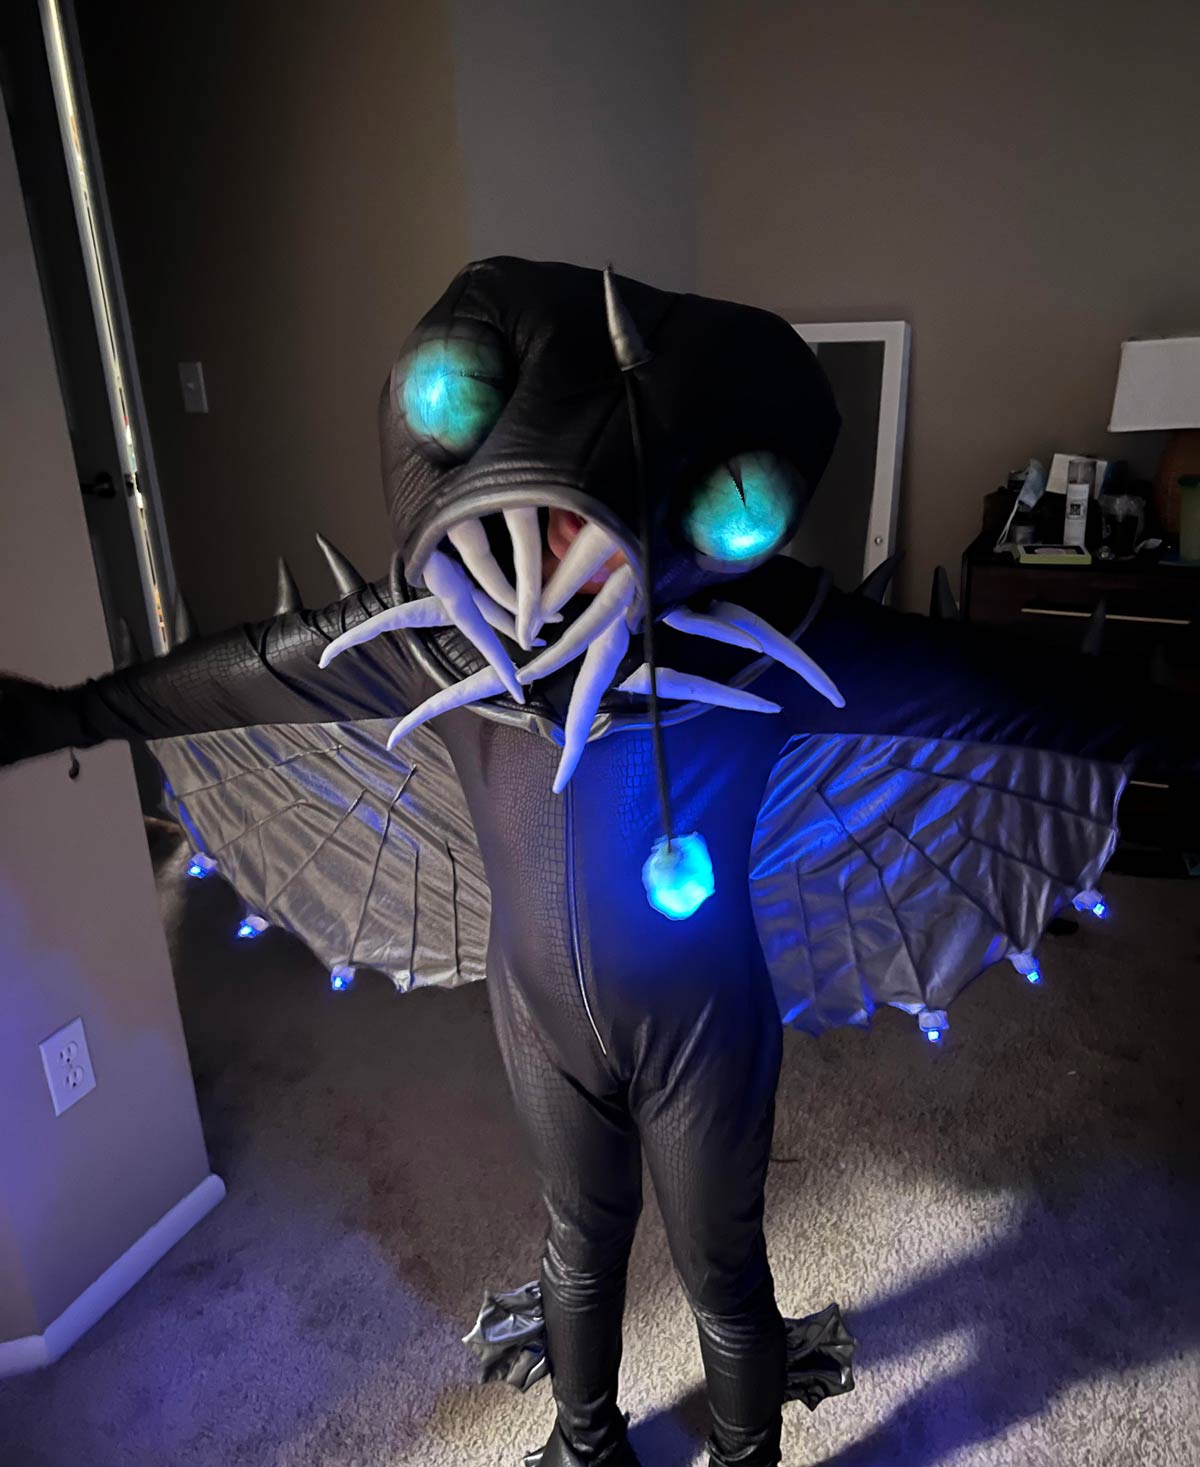 My 8 year old asked to be an Anglerfish for Halloween, but only if I could make it light up